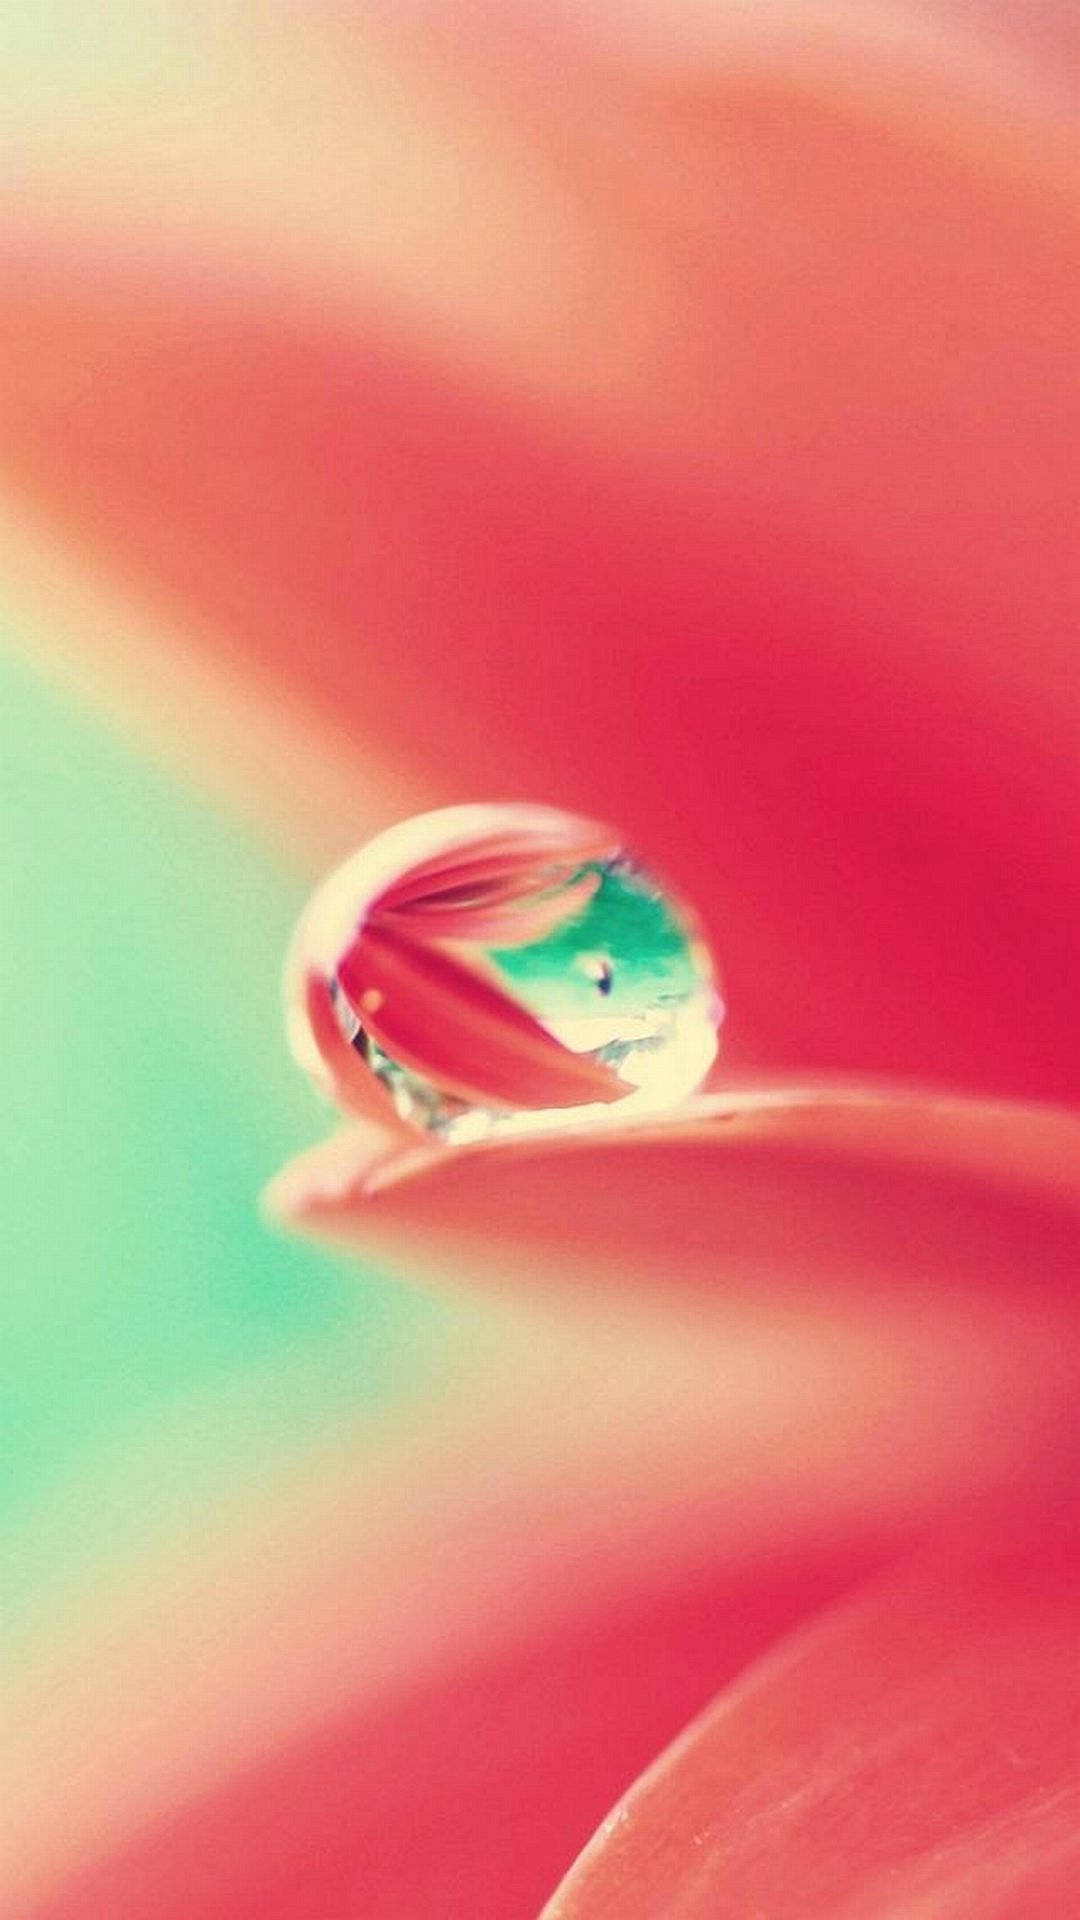 Flower Water Droplet Top Iphone Hd Background